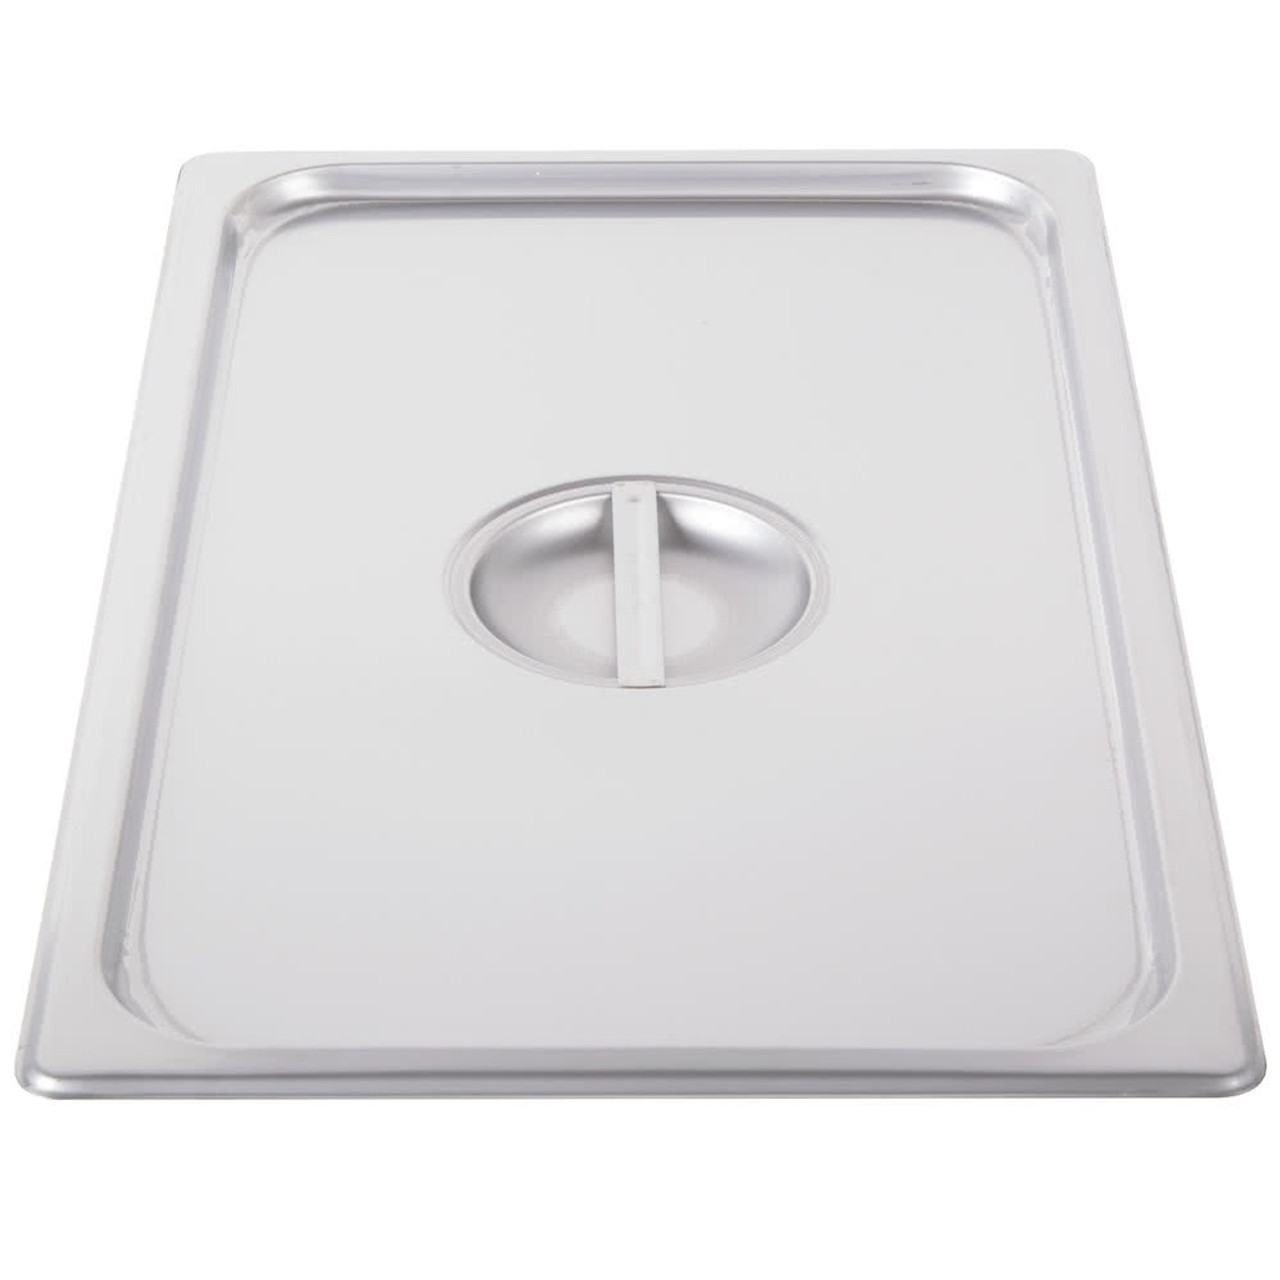 buy | shop | sto241, 52000, 575528, Stainless Steel Solid Steam Table / Hotel Pan Cover- Full Size